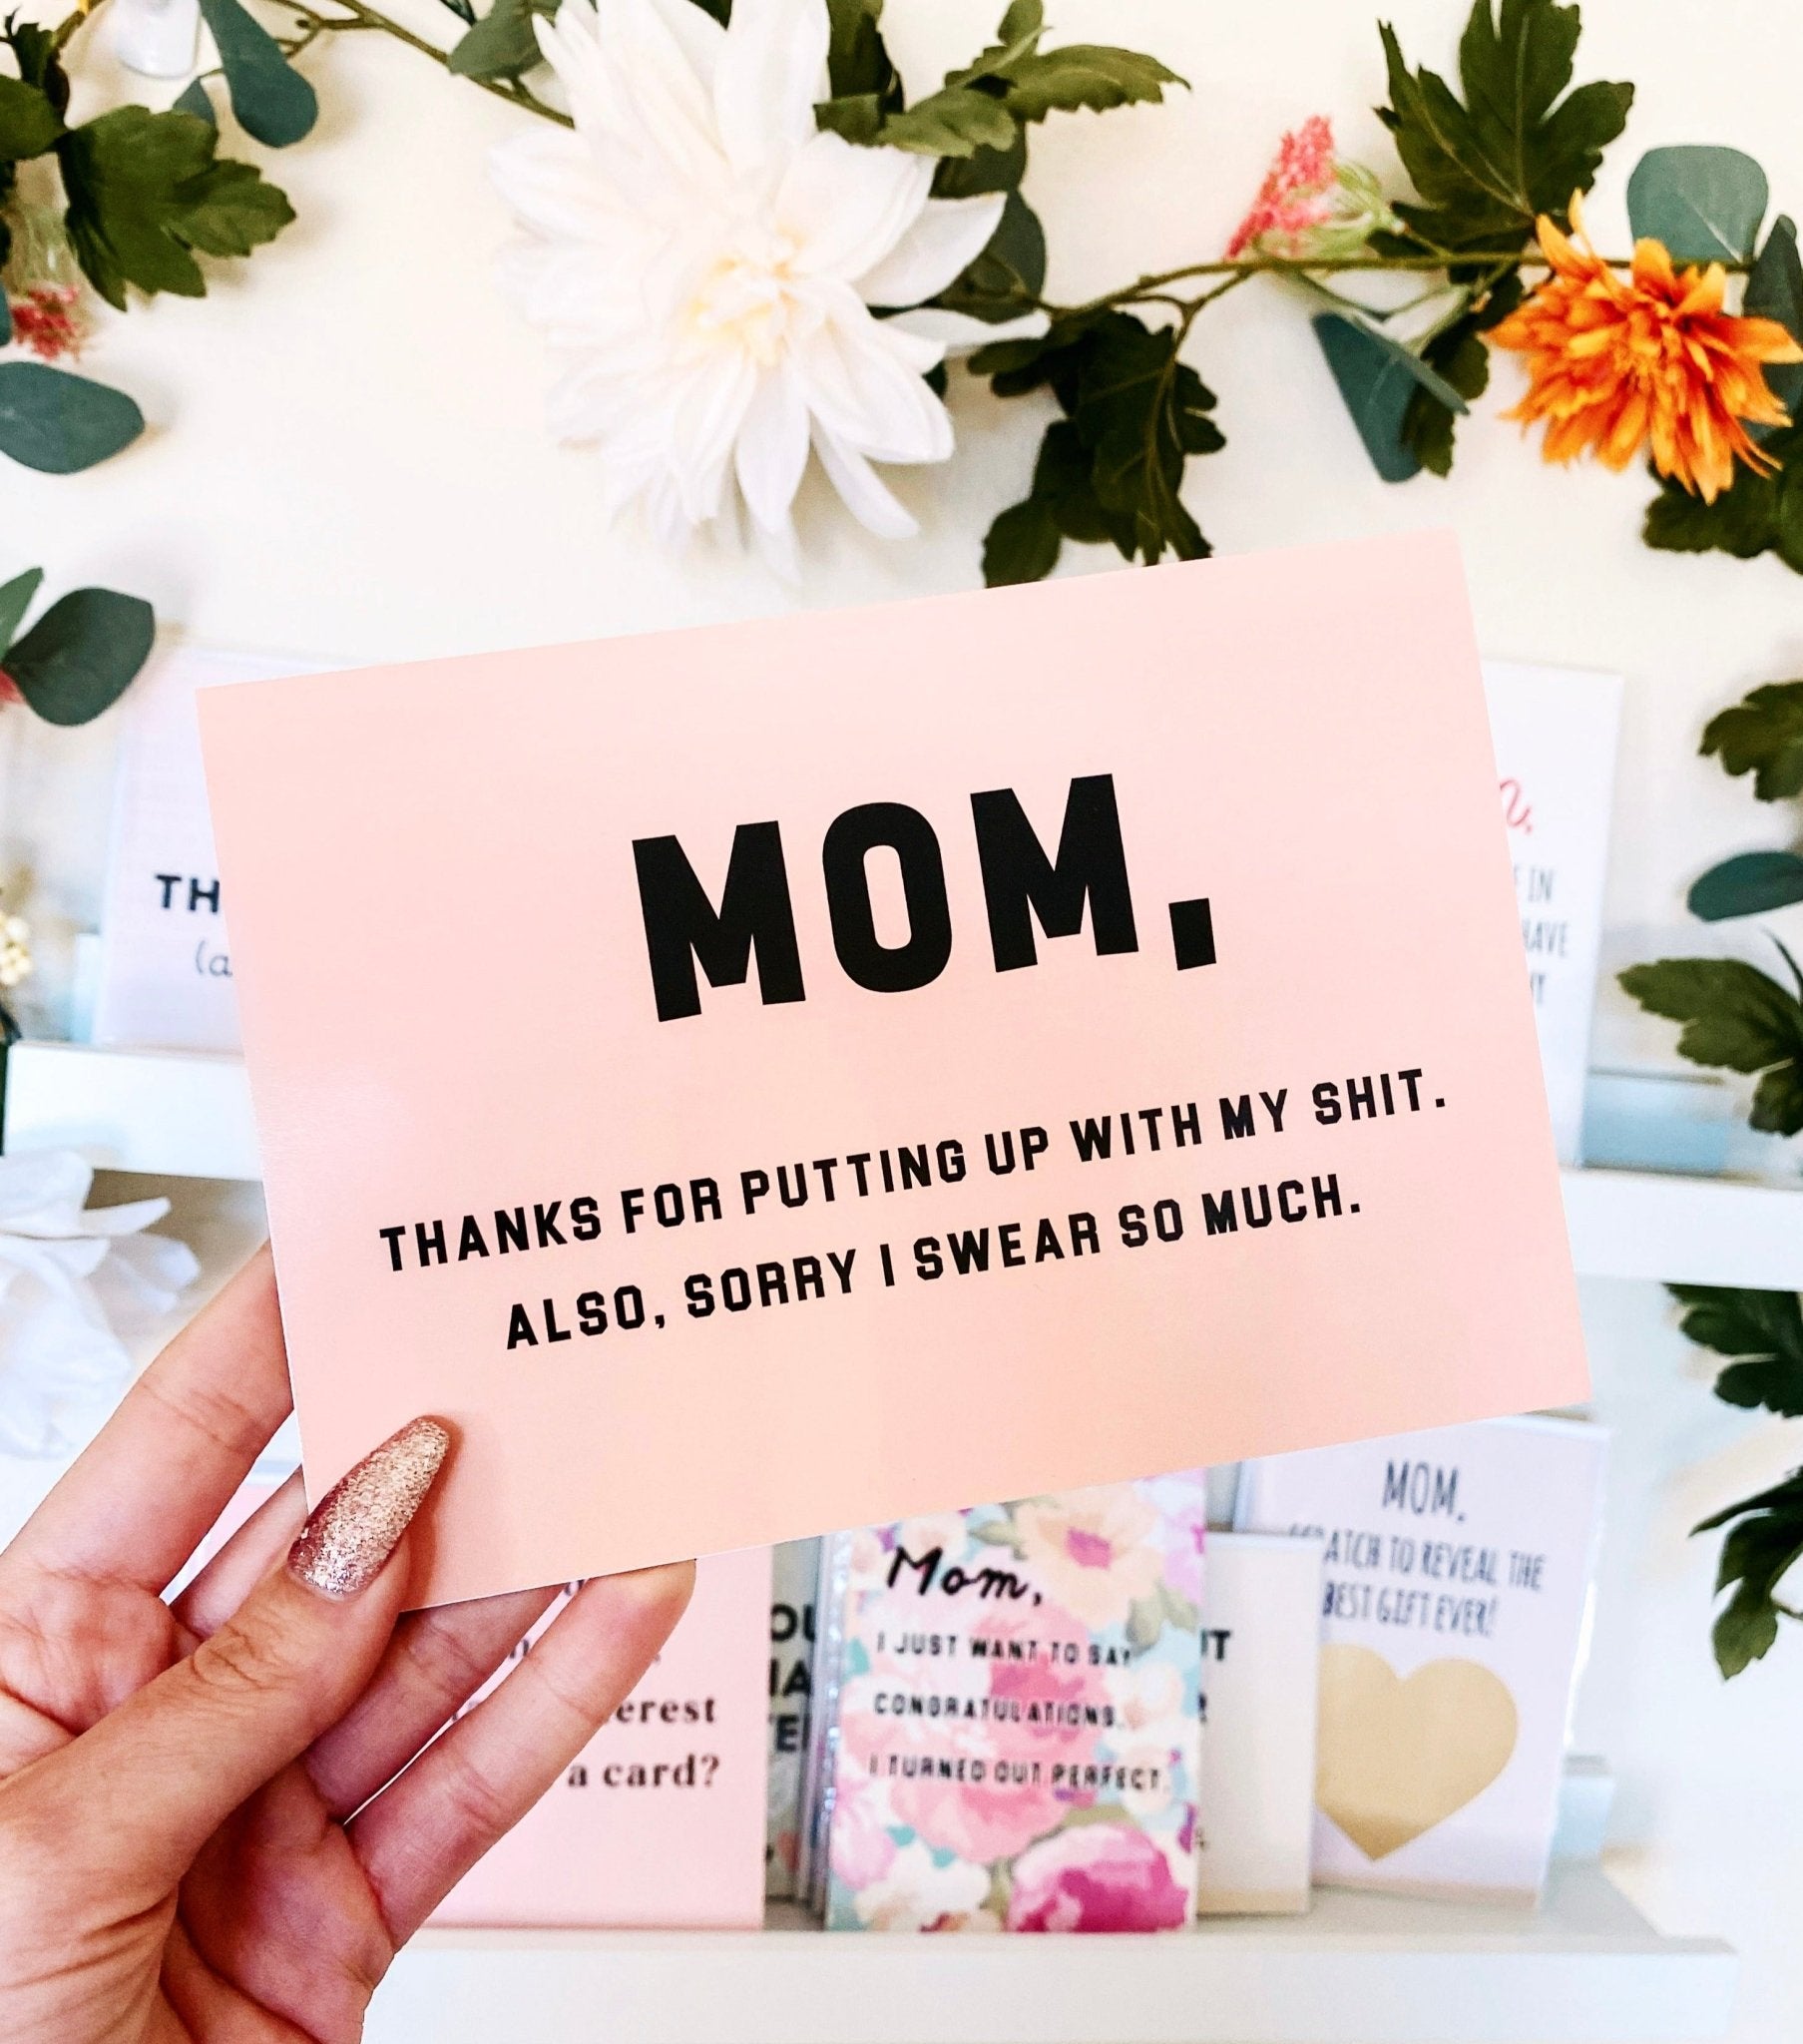 Mom Thanks For Putting Up With My Shi* Also Sorry I Swear So Much Greeting Card - UntamedEgo LLC.